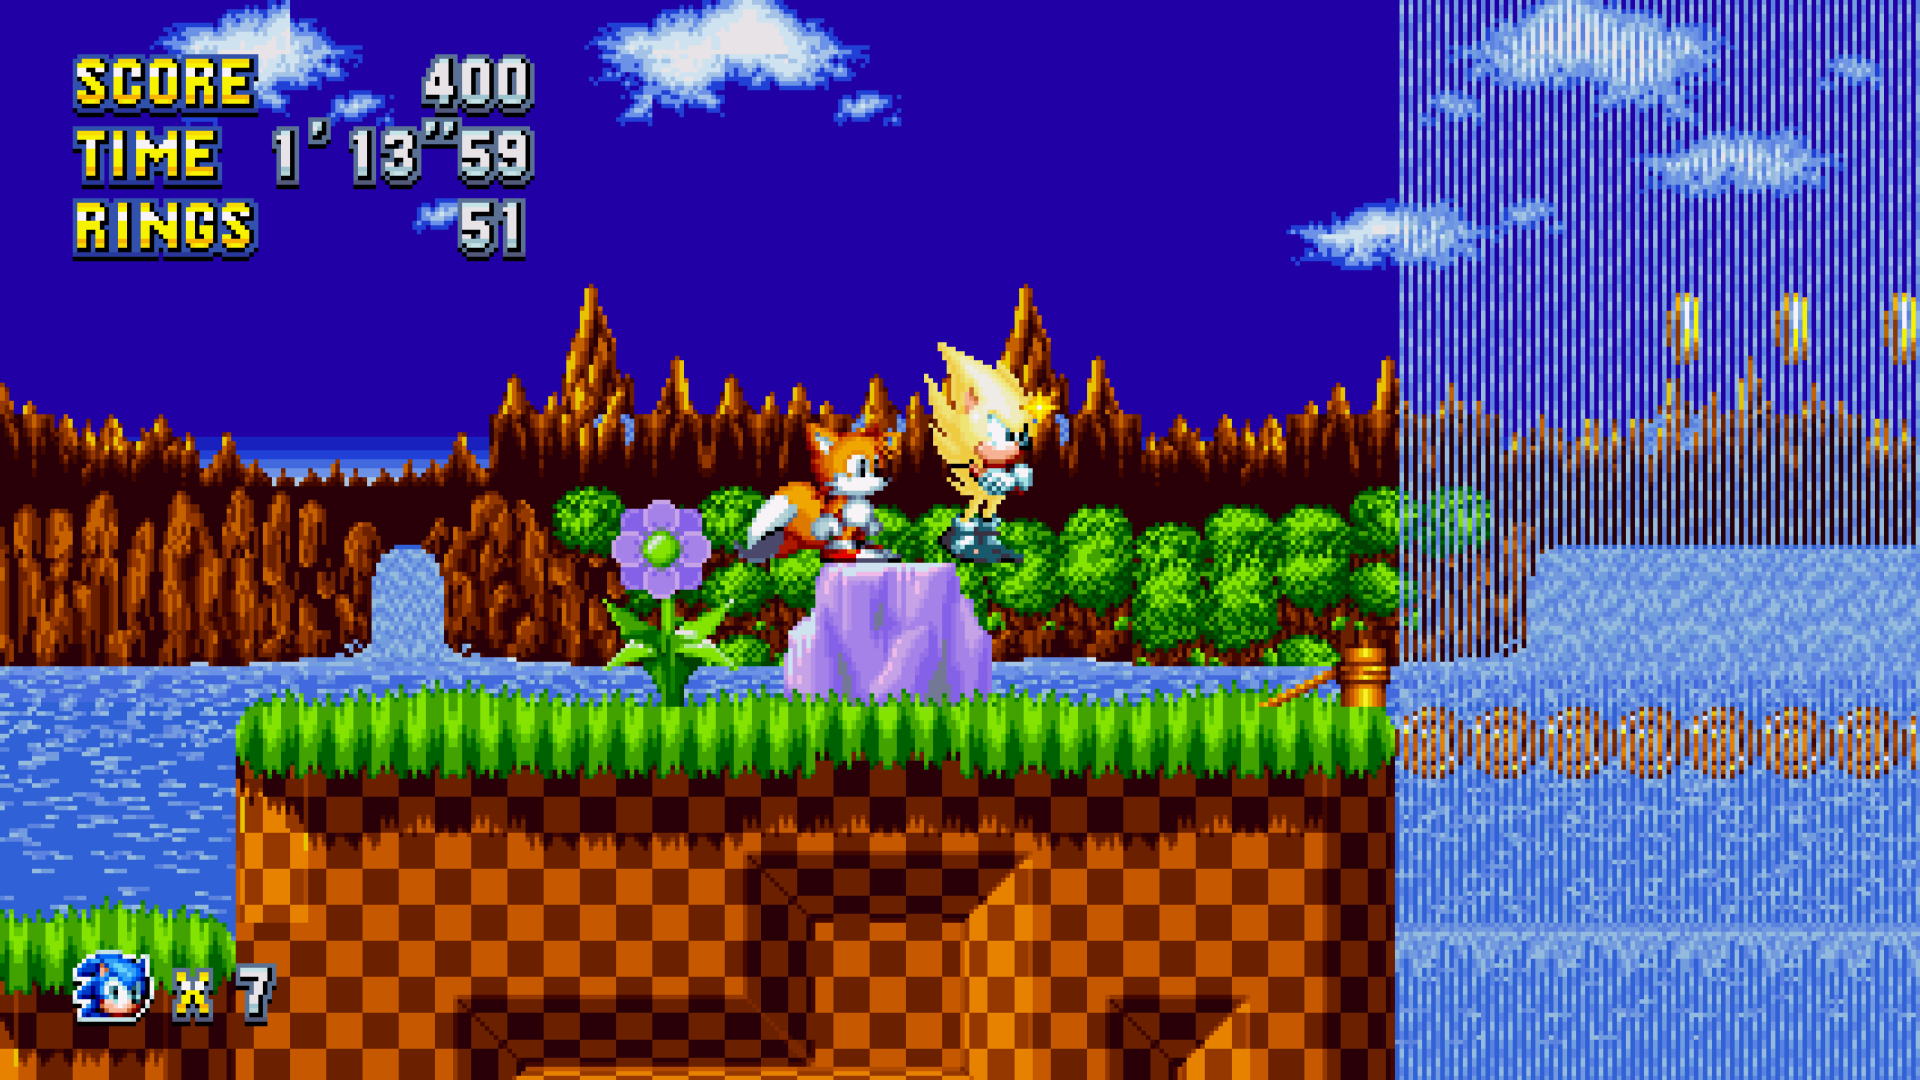 Image 6 - A New Shoes For Sonic mod for Sonic Mania - Mod DB